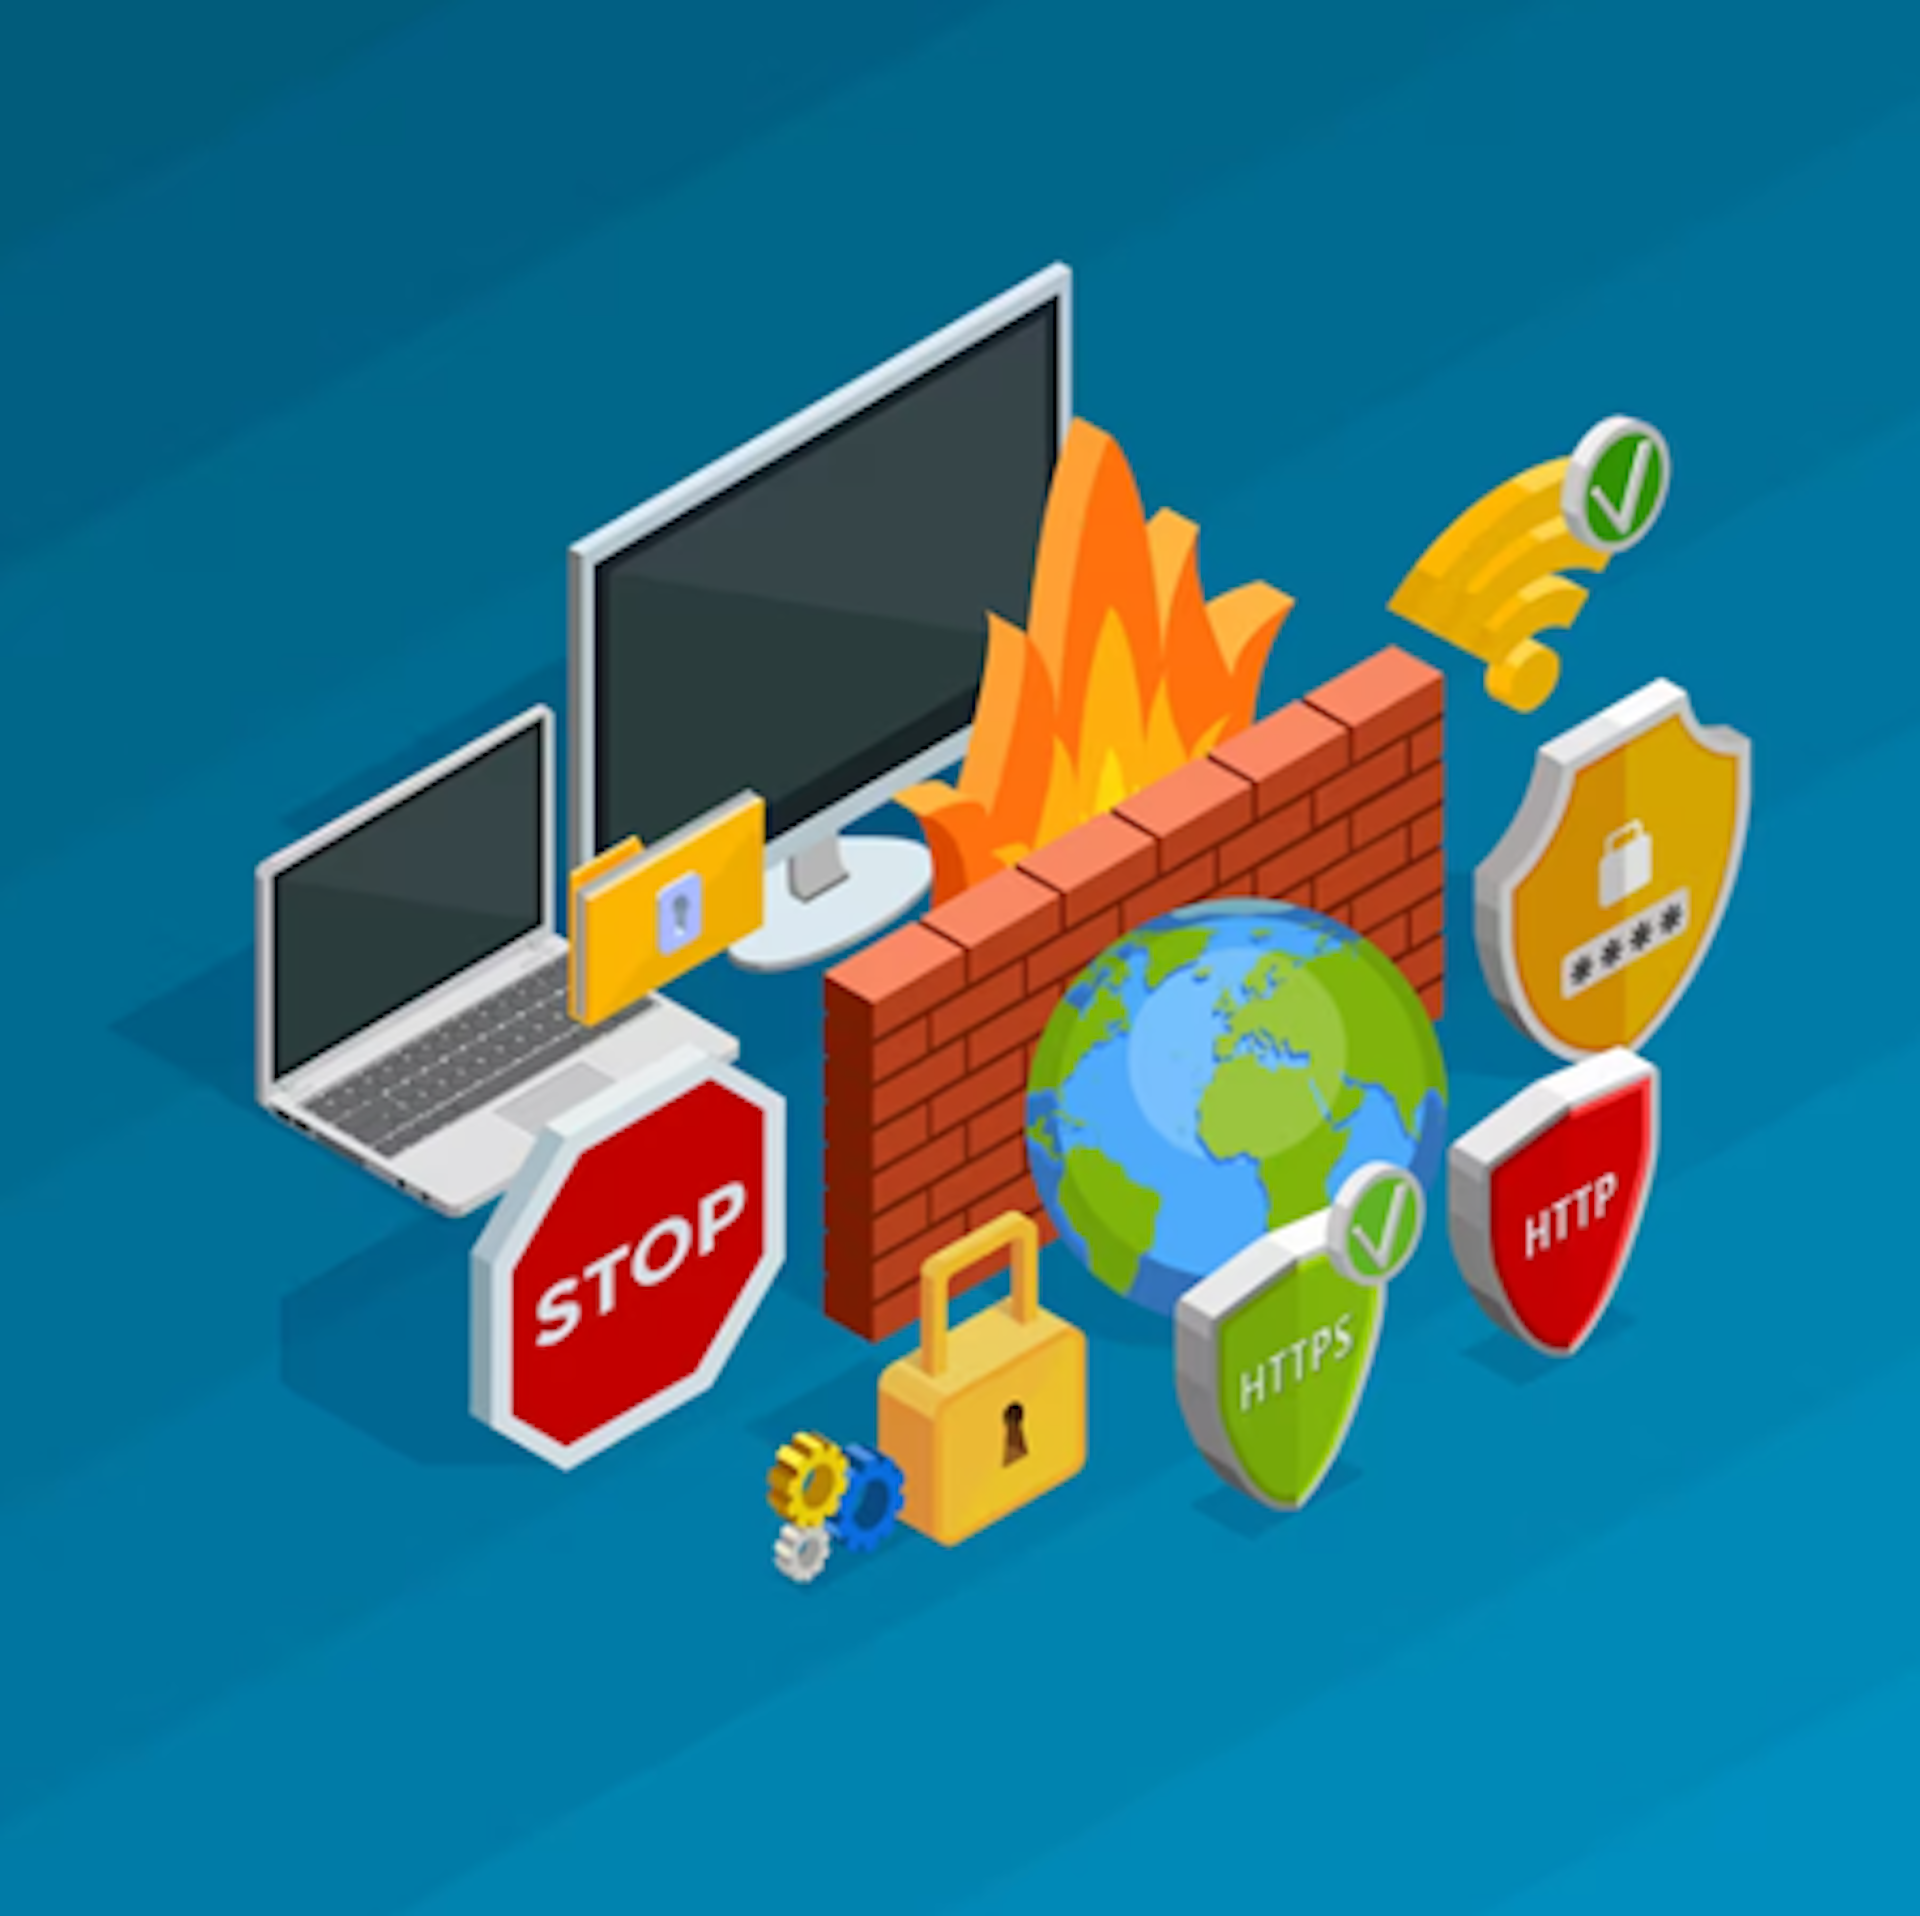 Firewalls and Security Measures